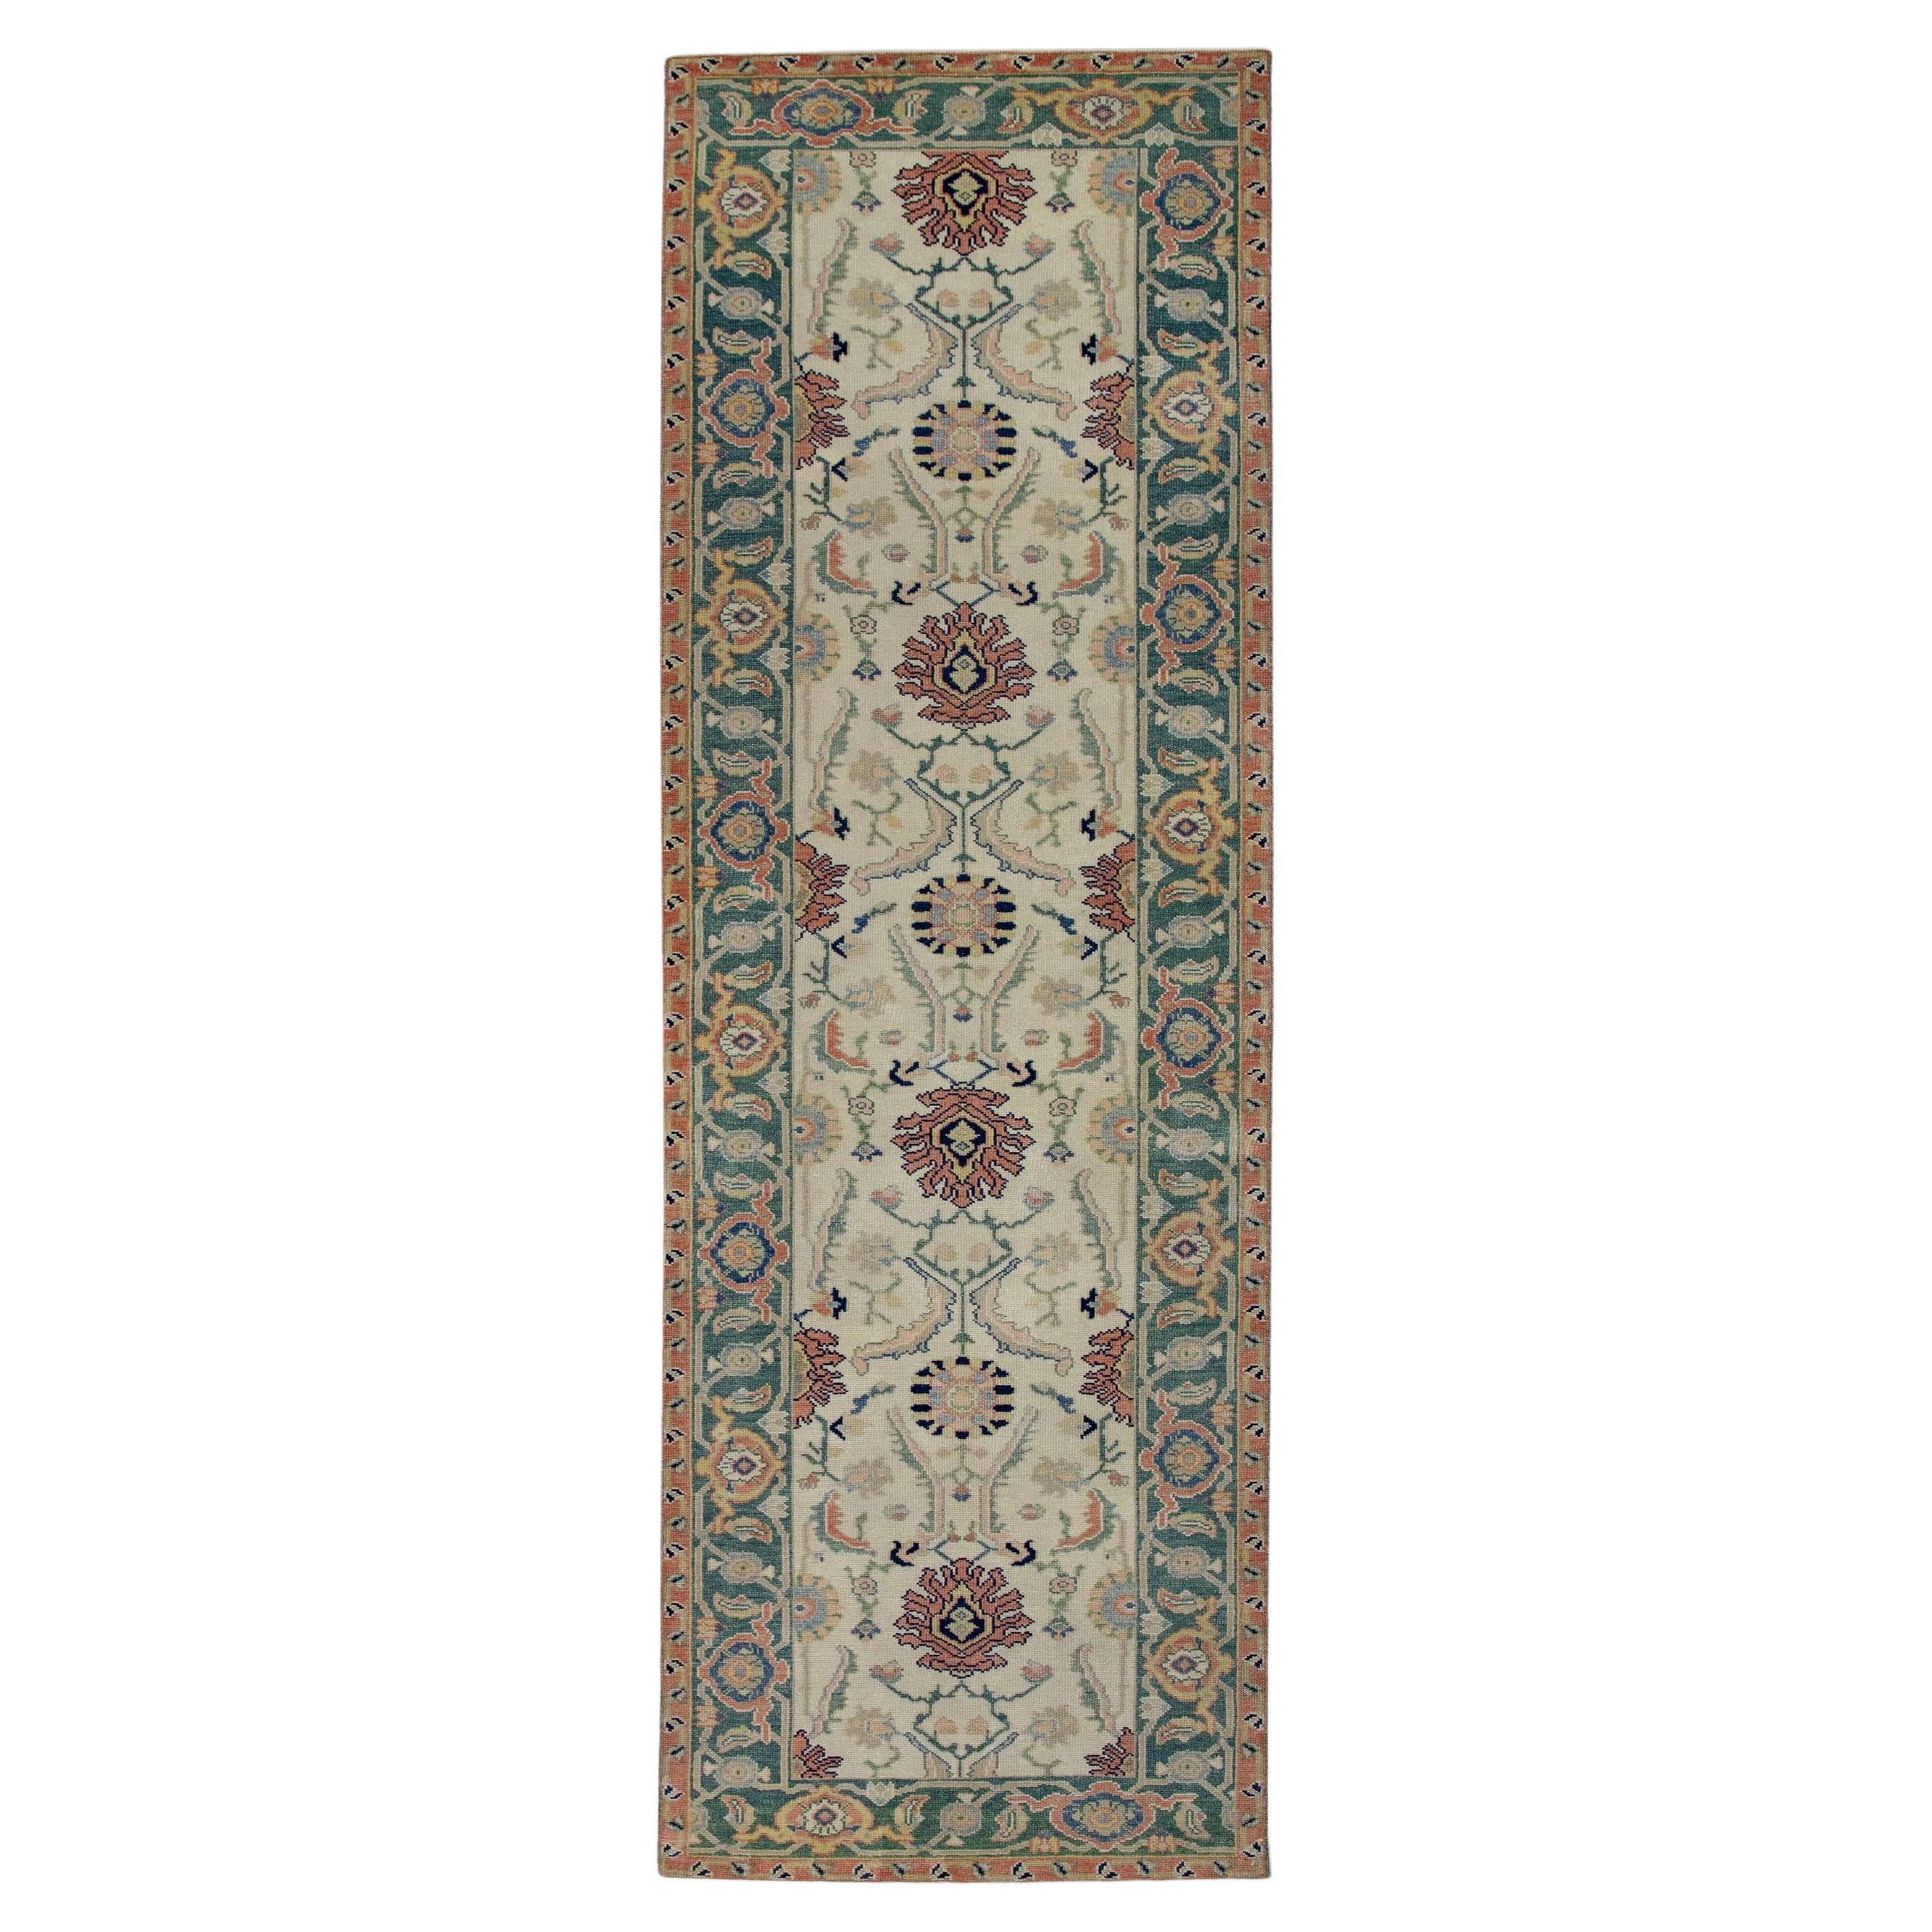 Floral Wool Turkish Finewoven Oushak Rug in Red, Cream, and Green 2'7" x 9'6" For Sale